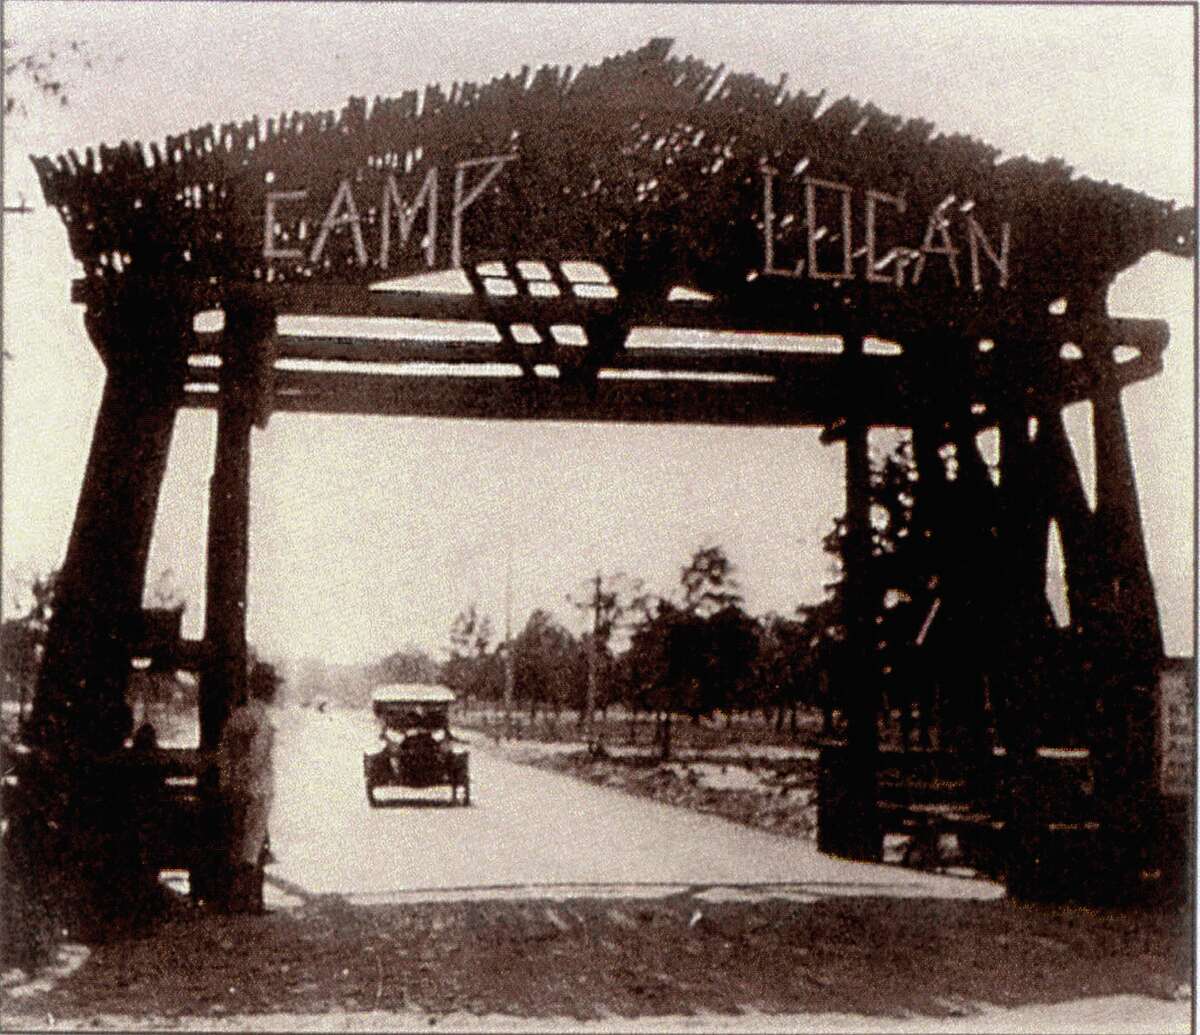 Camp Logan, circa 1917, was a World War I Army training facility located where Memorial Park is now.